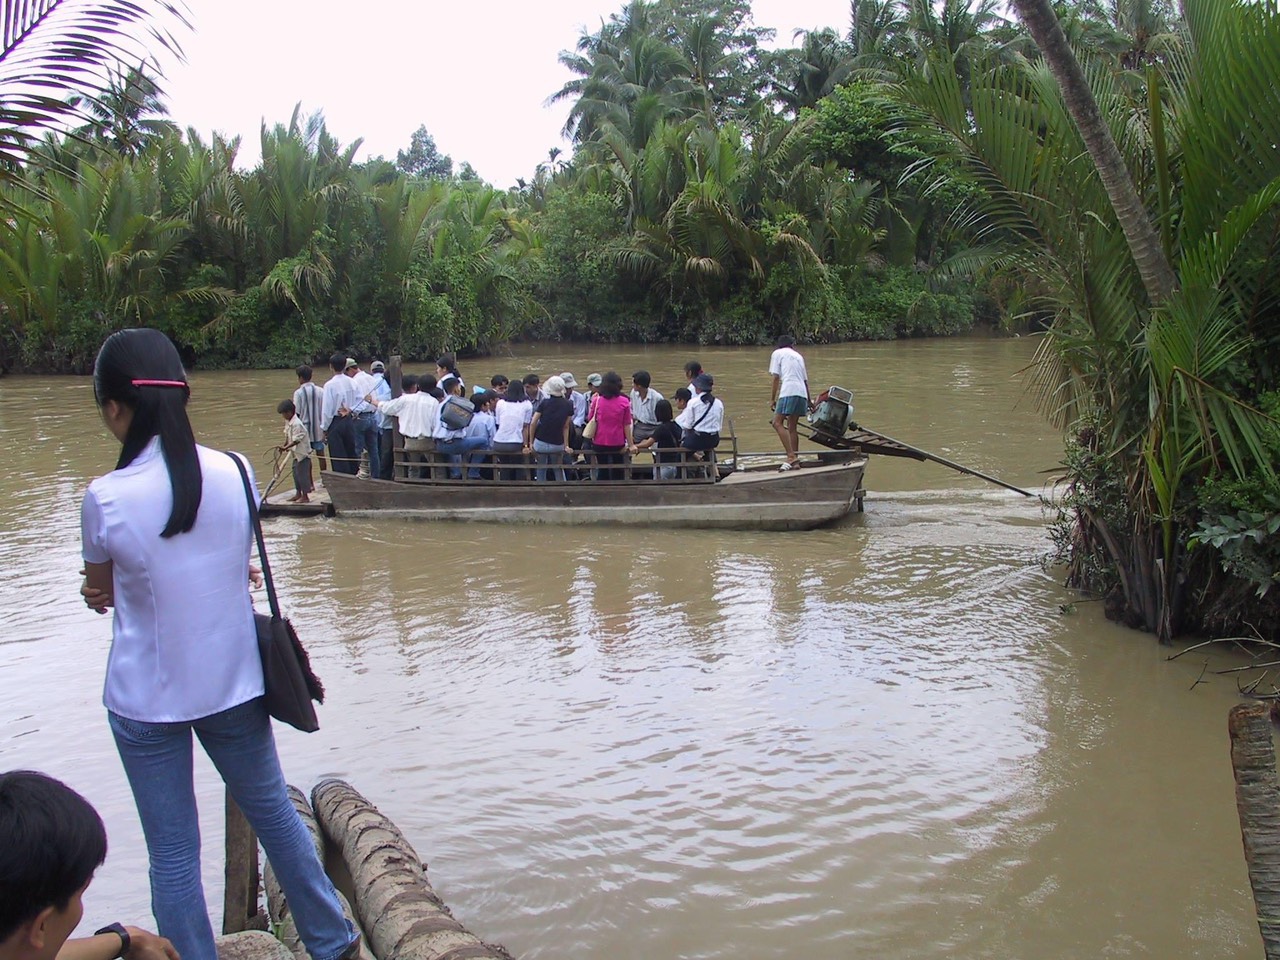 Students and staff crossing a muddy river on a long low motorboat to get to school.